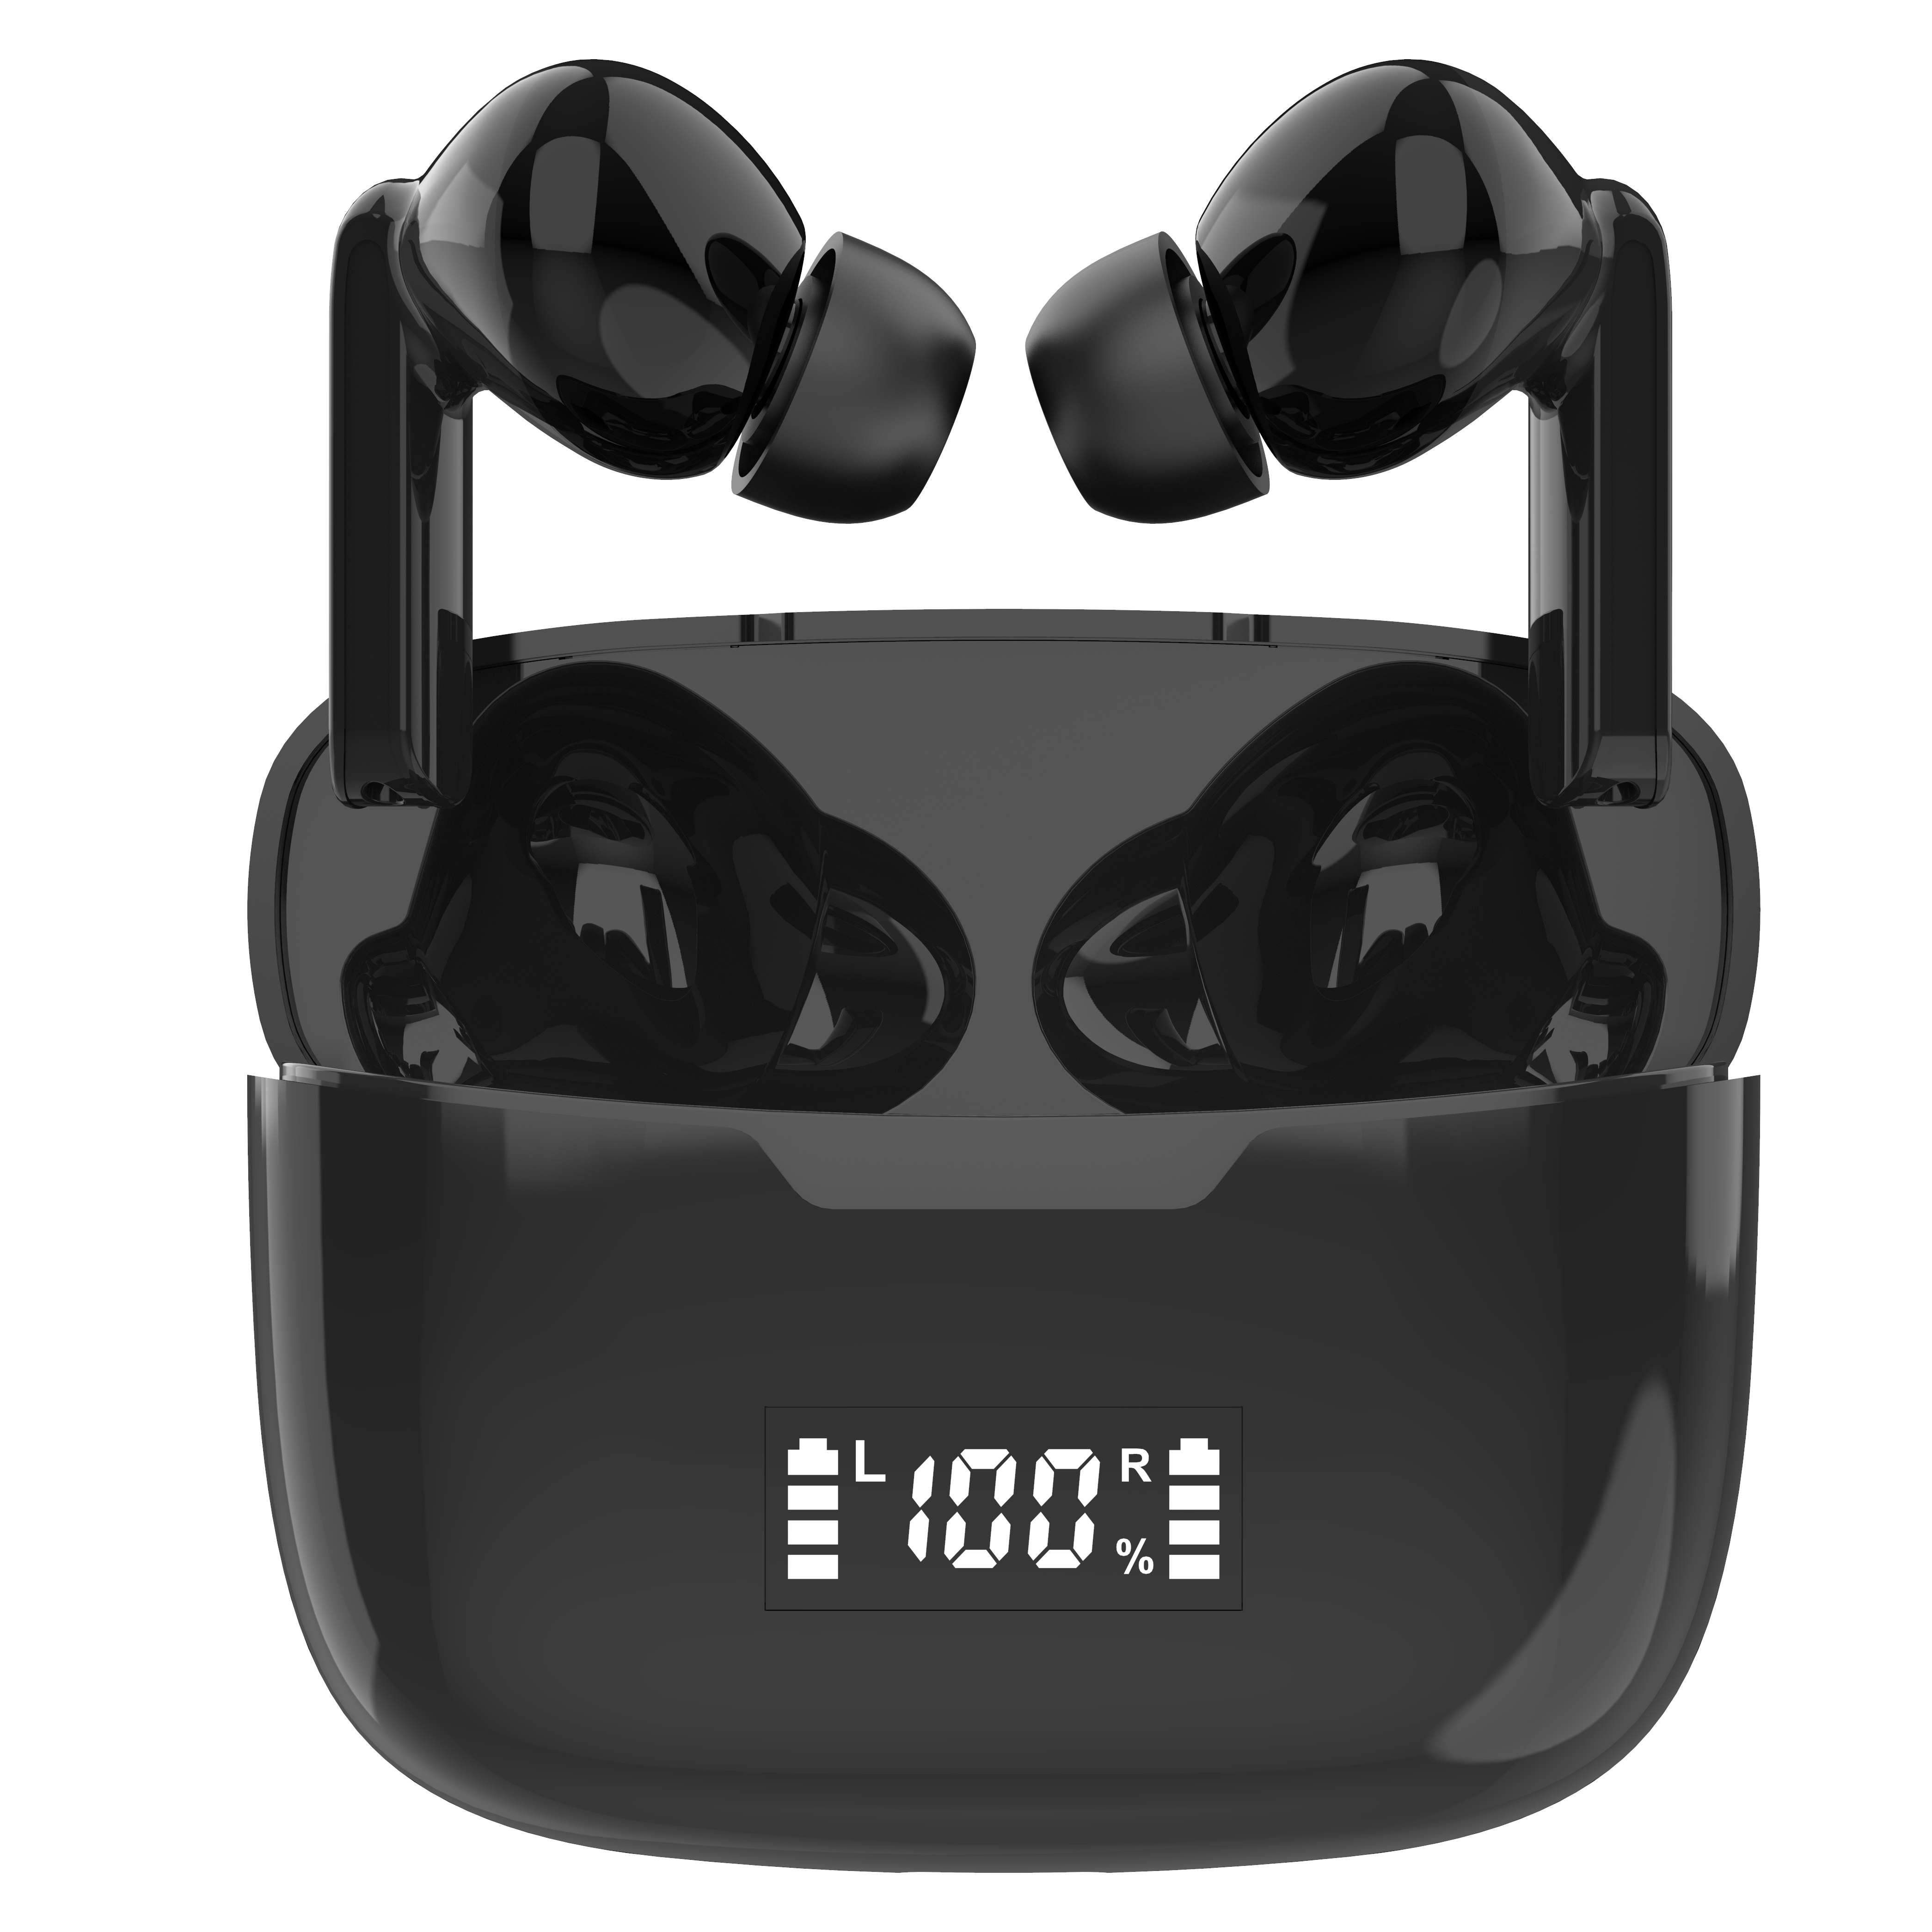 OEM/ODM Supplier Ps4 Wired Headphones - TWS Bluetooth Stereo Earbuds In Portable Design | Wellyp – Wellyp